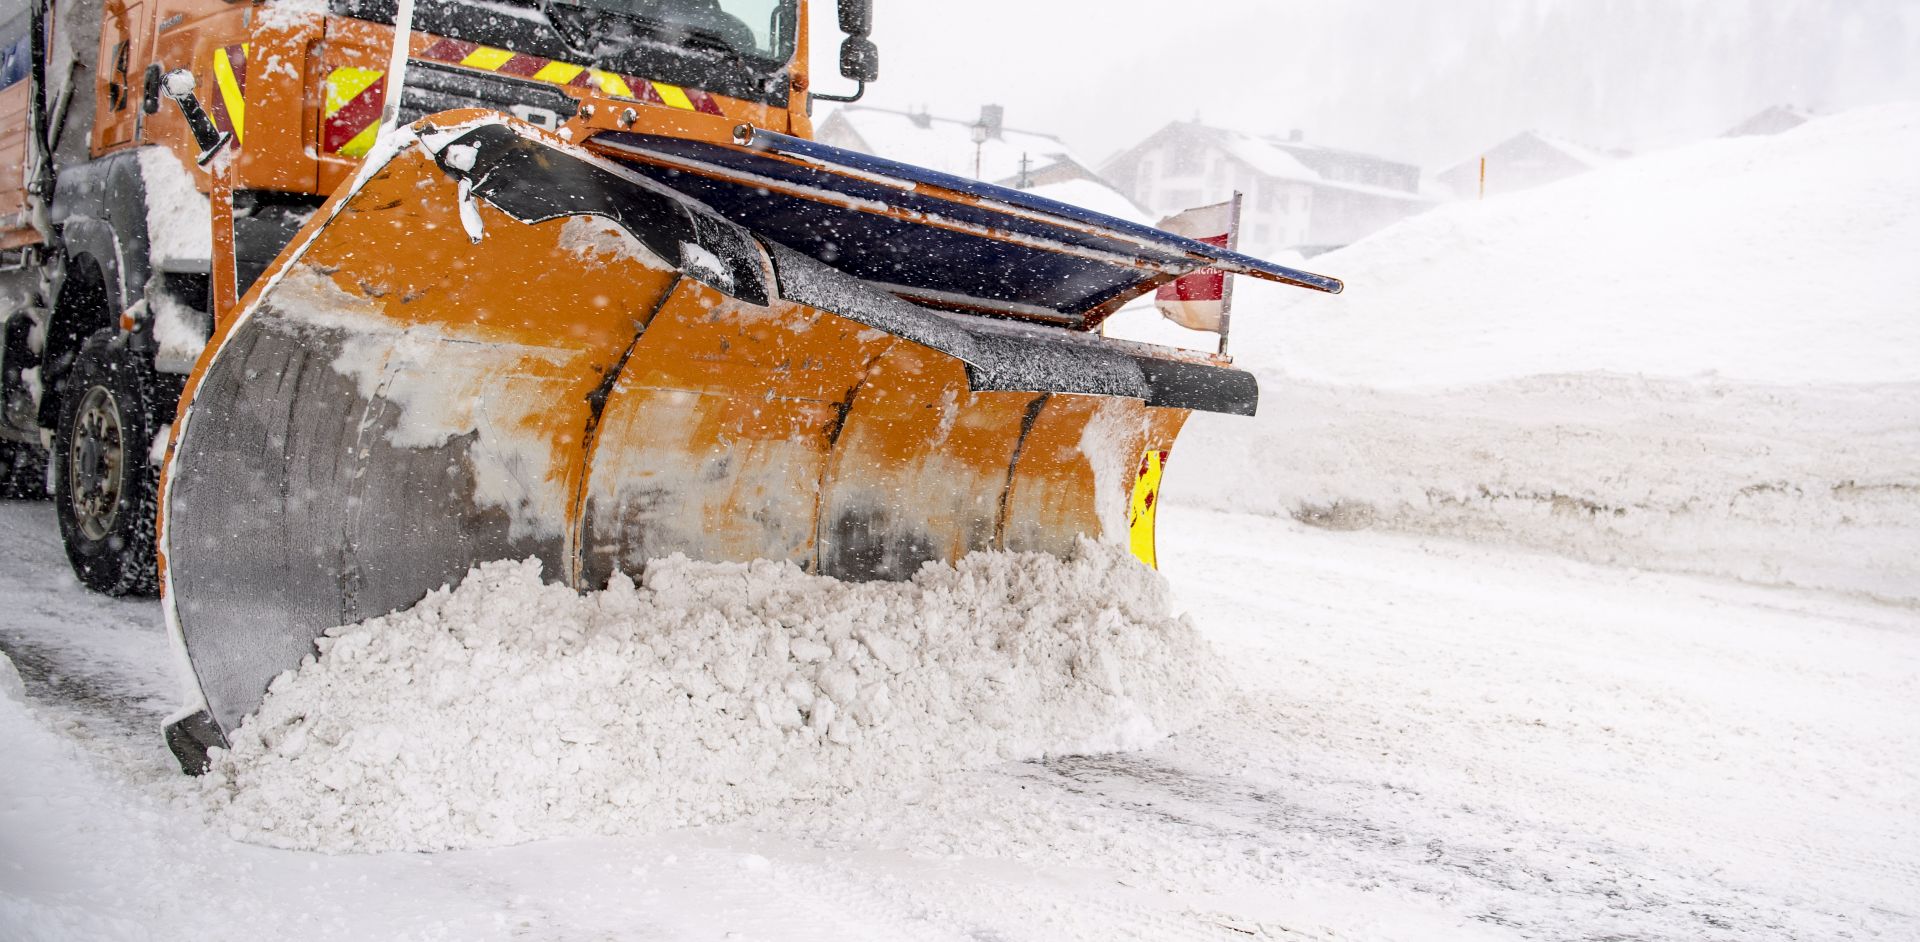 epa07263383 A snowplow truck cleans a road during heavy snowfall in Obertauern, Austria, 05 January 2019. Austria and southern Germany are expected to receive heavy snowfalls over the weekend. Weather forecasts warn that the snowstorm could cause roadblocks and increased avalanche danger in many parts of the affected region.  EPA/CHRISTIAN BRUNA